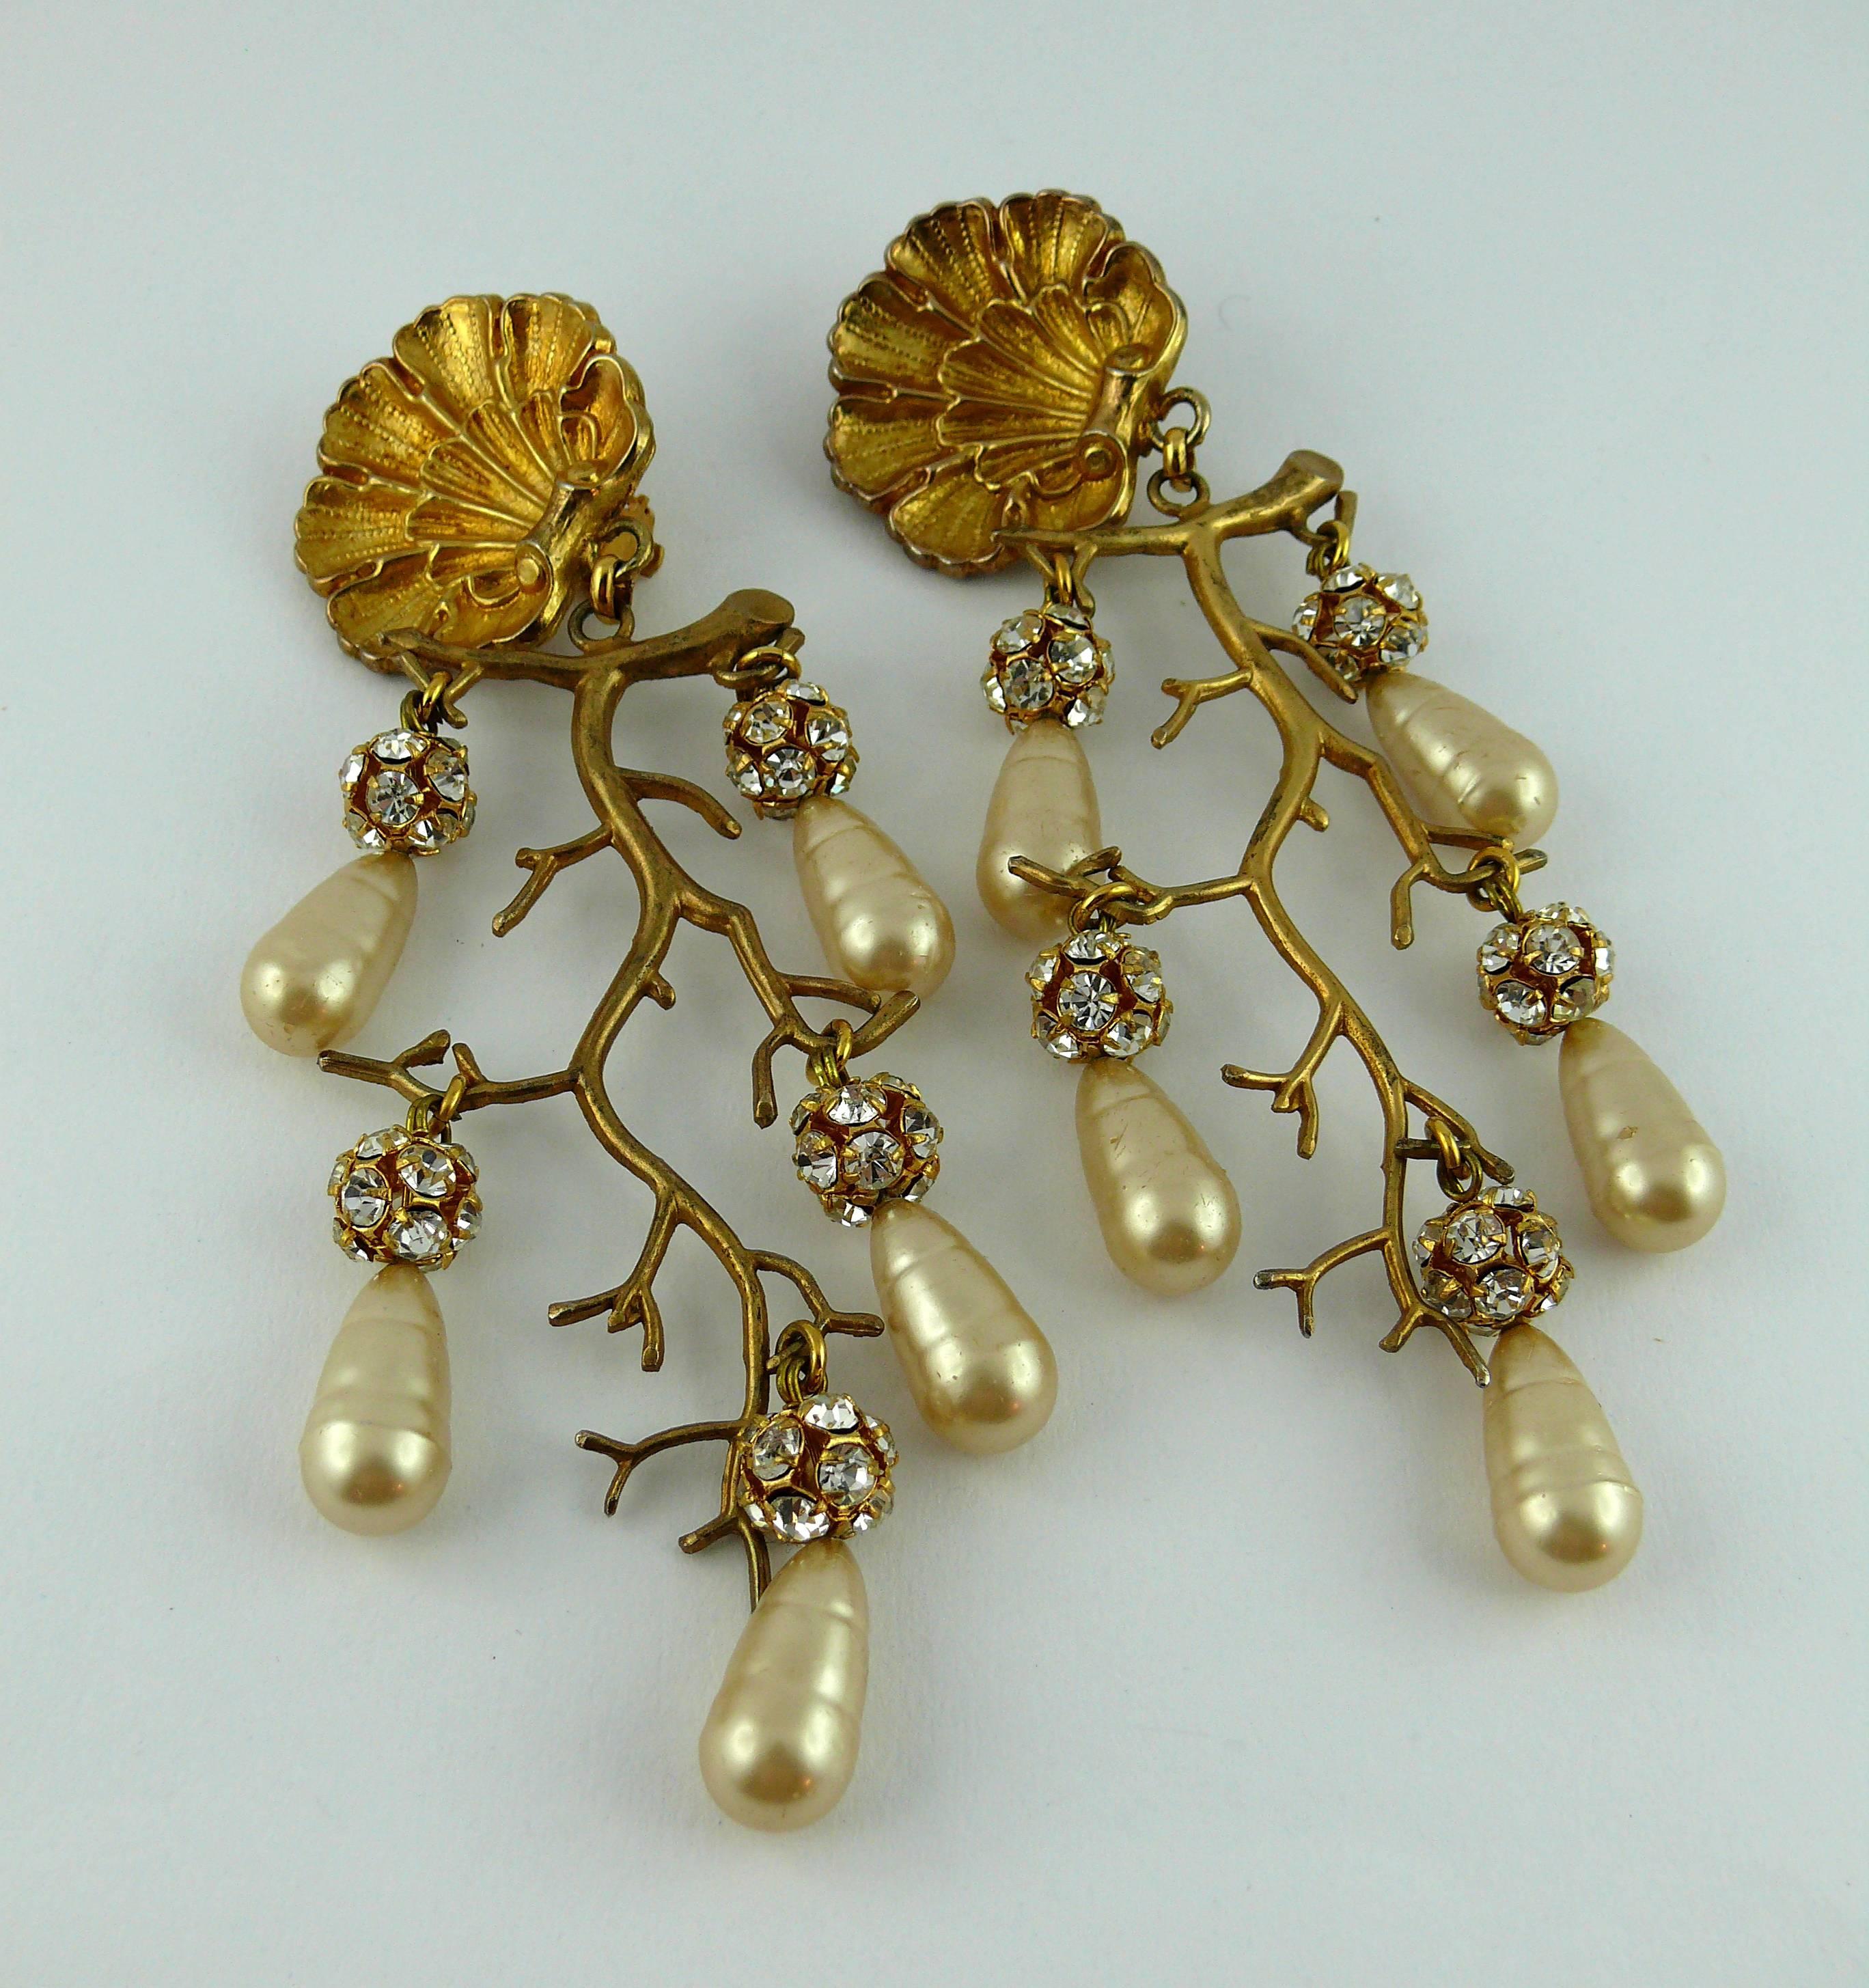 PHILIPPE FERRANDIS vintage shoulder duster Baroque shell design chandelier earrings.

Gold toned metal embellished with crystal rondelles and glass faux pearl drops.

Marked PHILIPPE FERRANDIS Paris.

JEWELRY CONDITION CHART
- New or never worn :